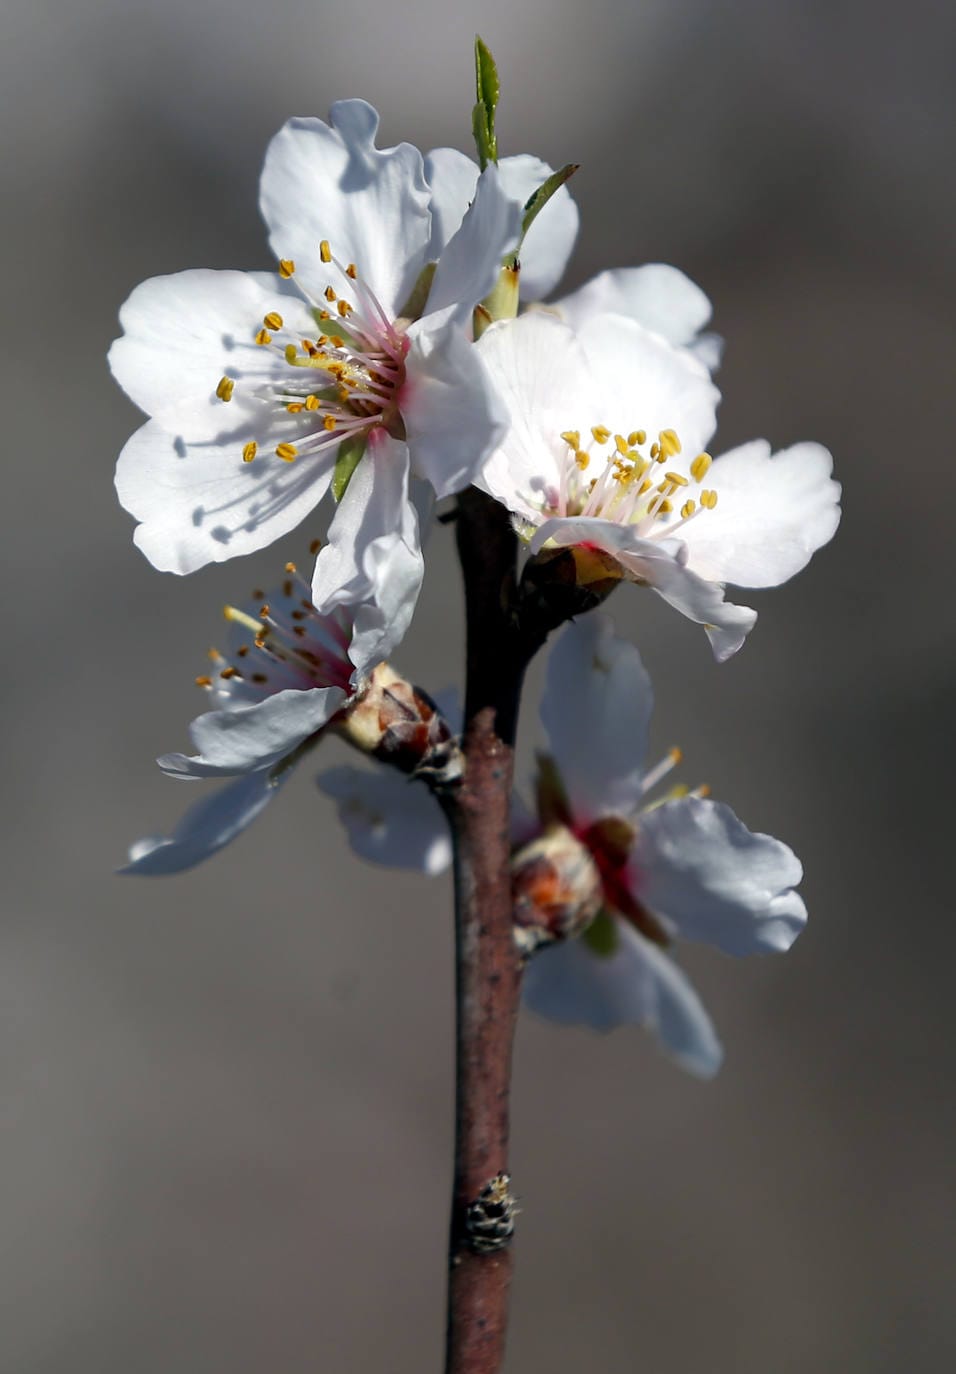 Blooming lovely... the almond trees in flower